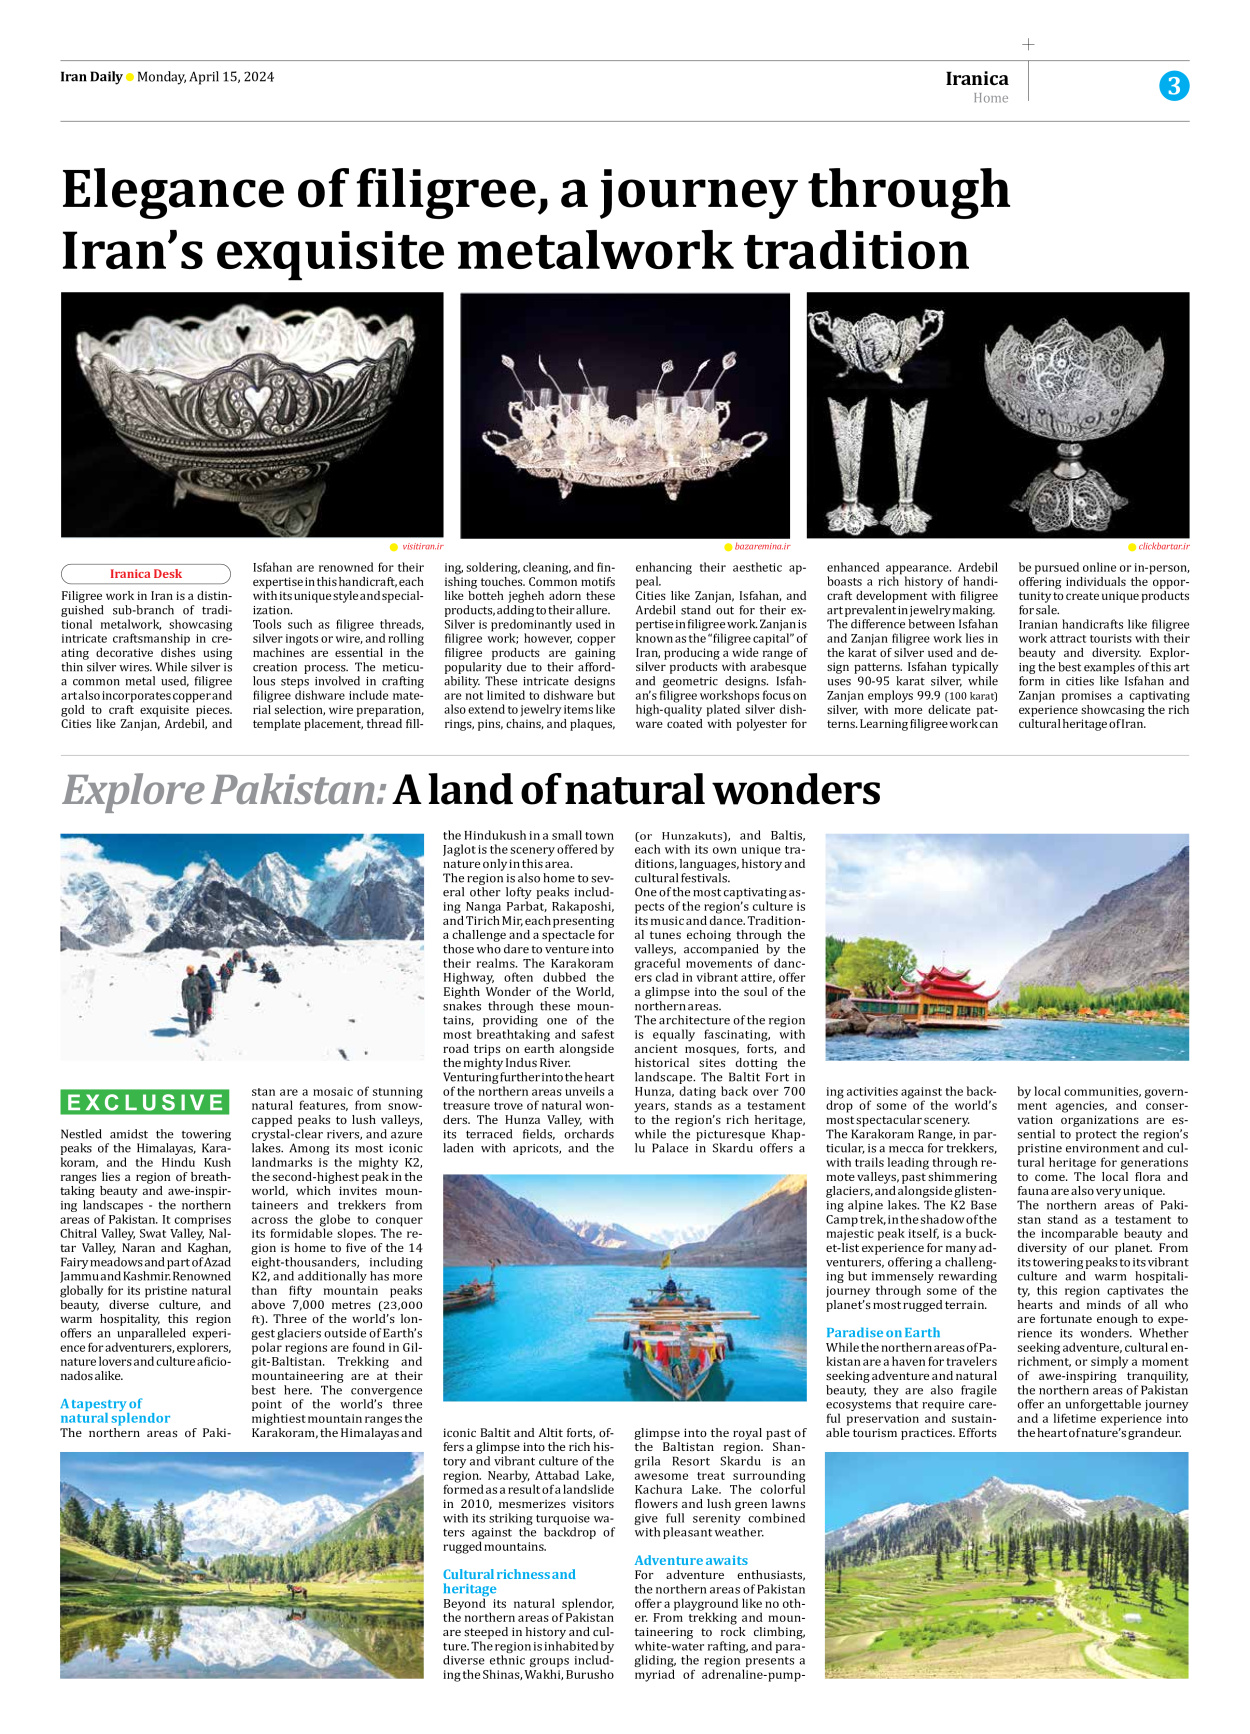 Iran Daily - Number Seven Thousand Five Hundred and Thirty Three - 15 April 2024 - Page 3